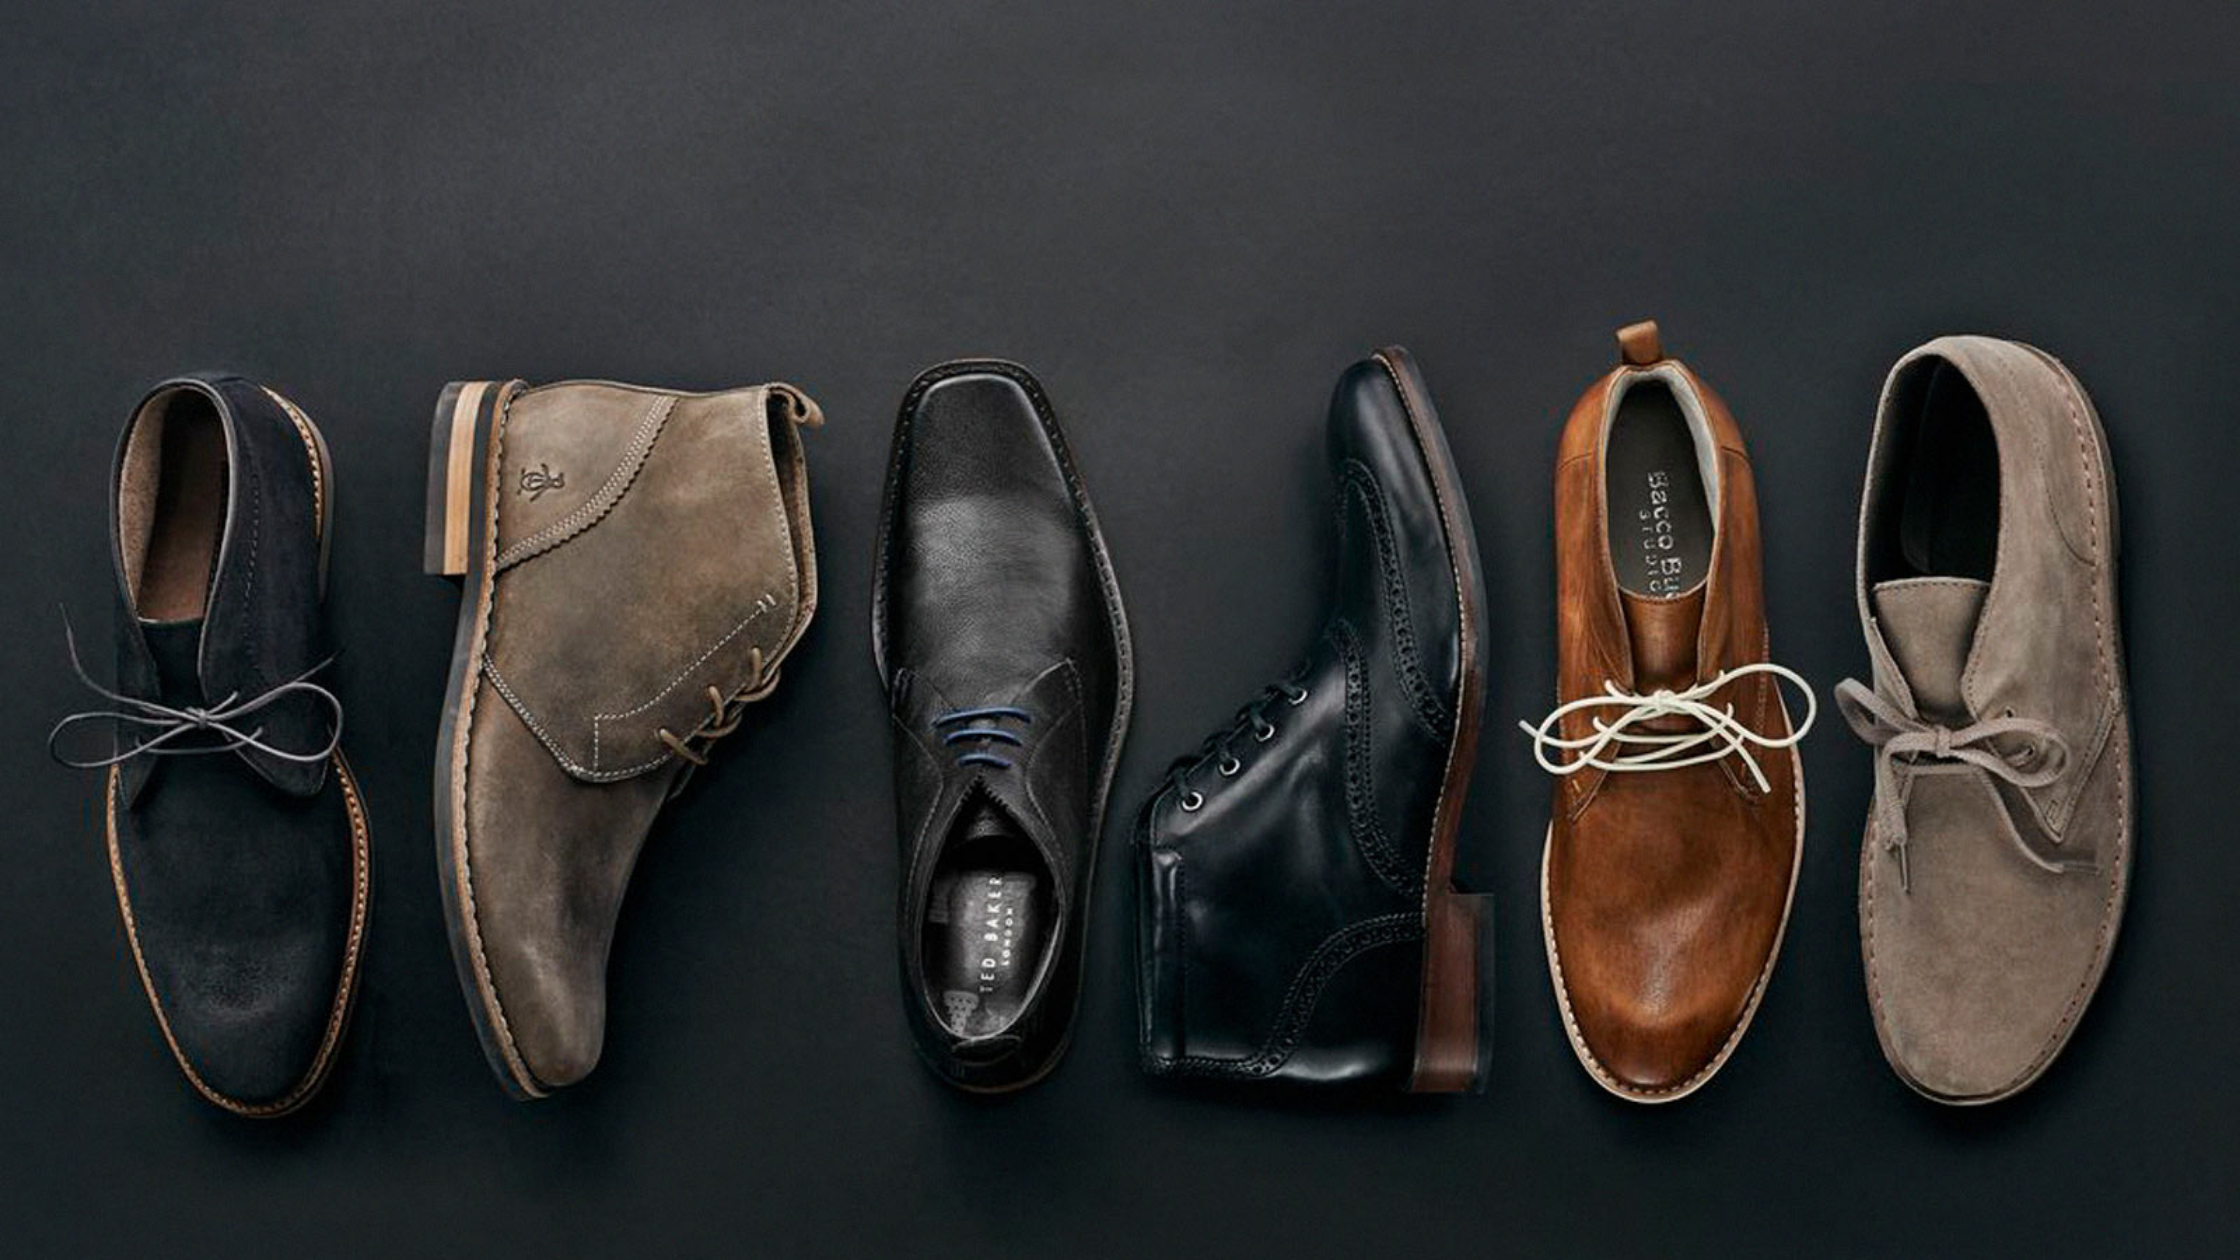 Why should your leather shoes and accessories be nourished at regular intervals?